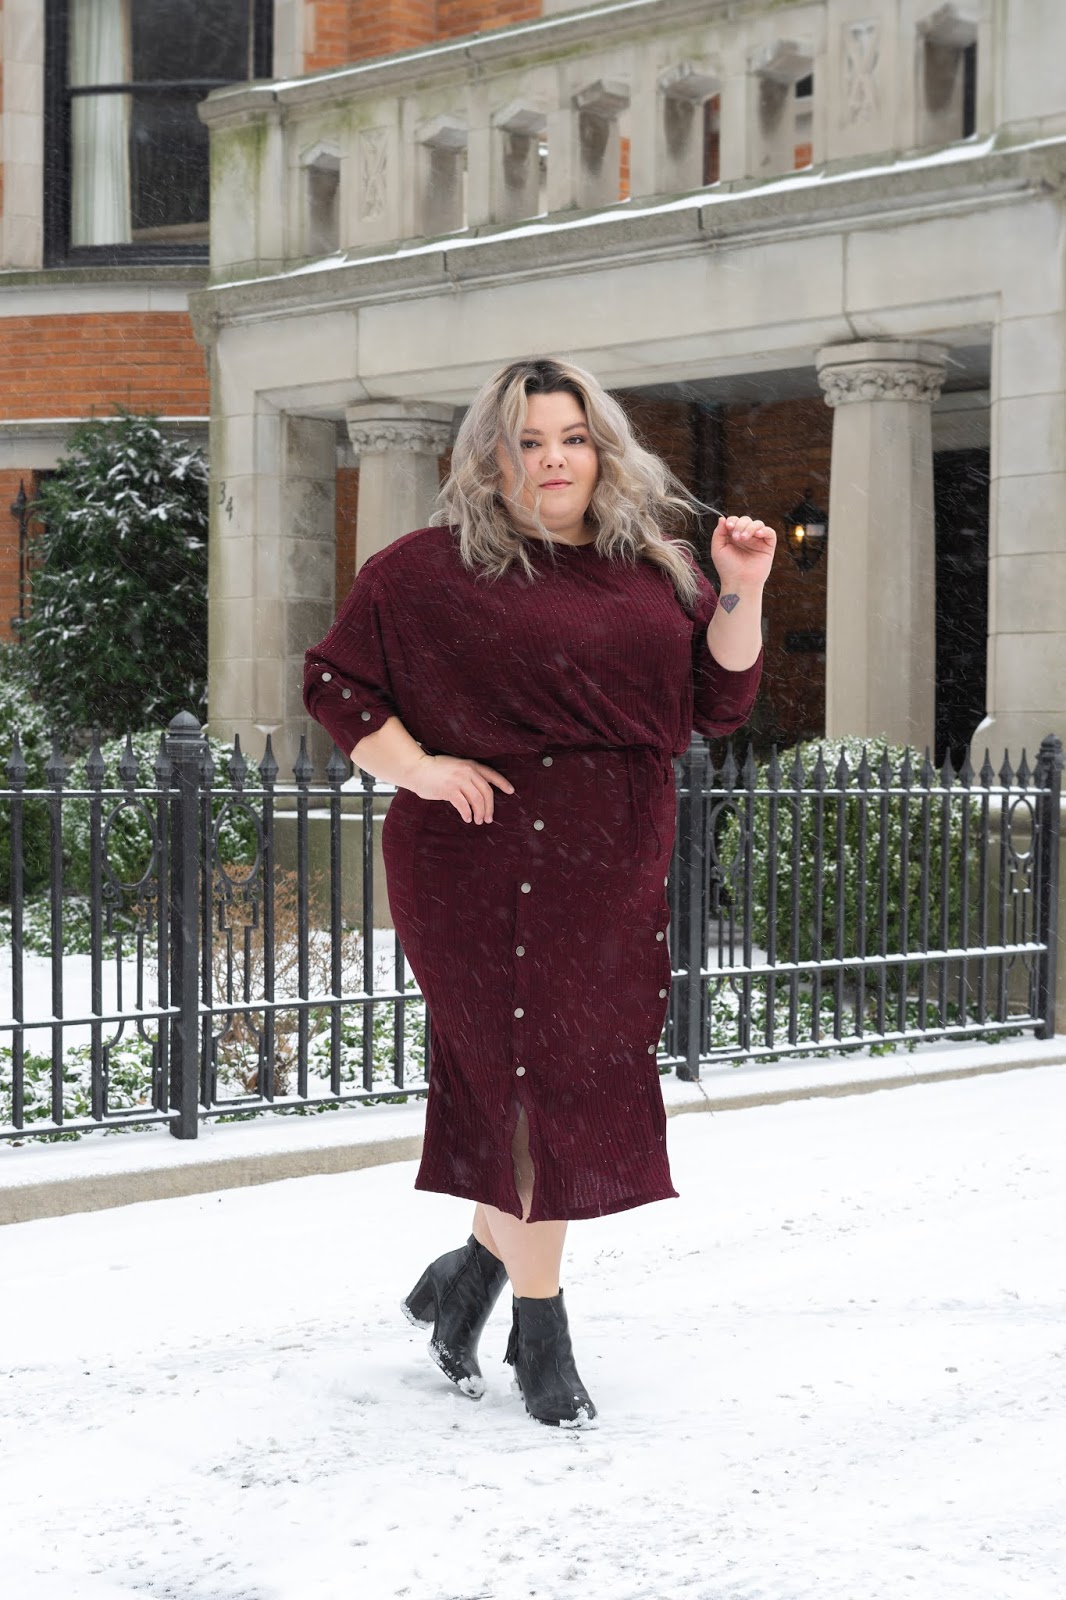 Chicago Plus Size Petite Fashion Blogger, youtuber, and model Natalie Craig, of Natalie in the City, reviews Soncy's Ruby Red Midi Skirt and Cropped Top.